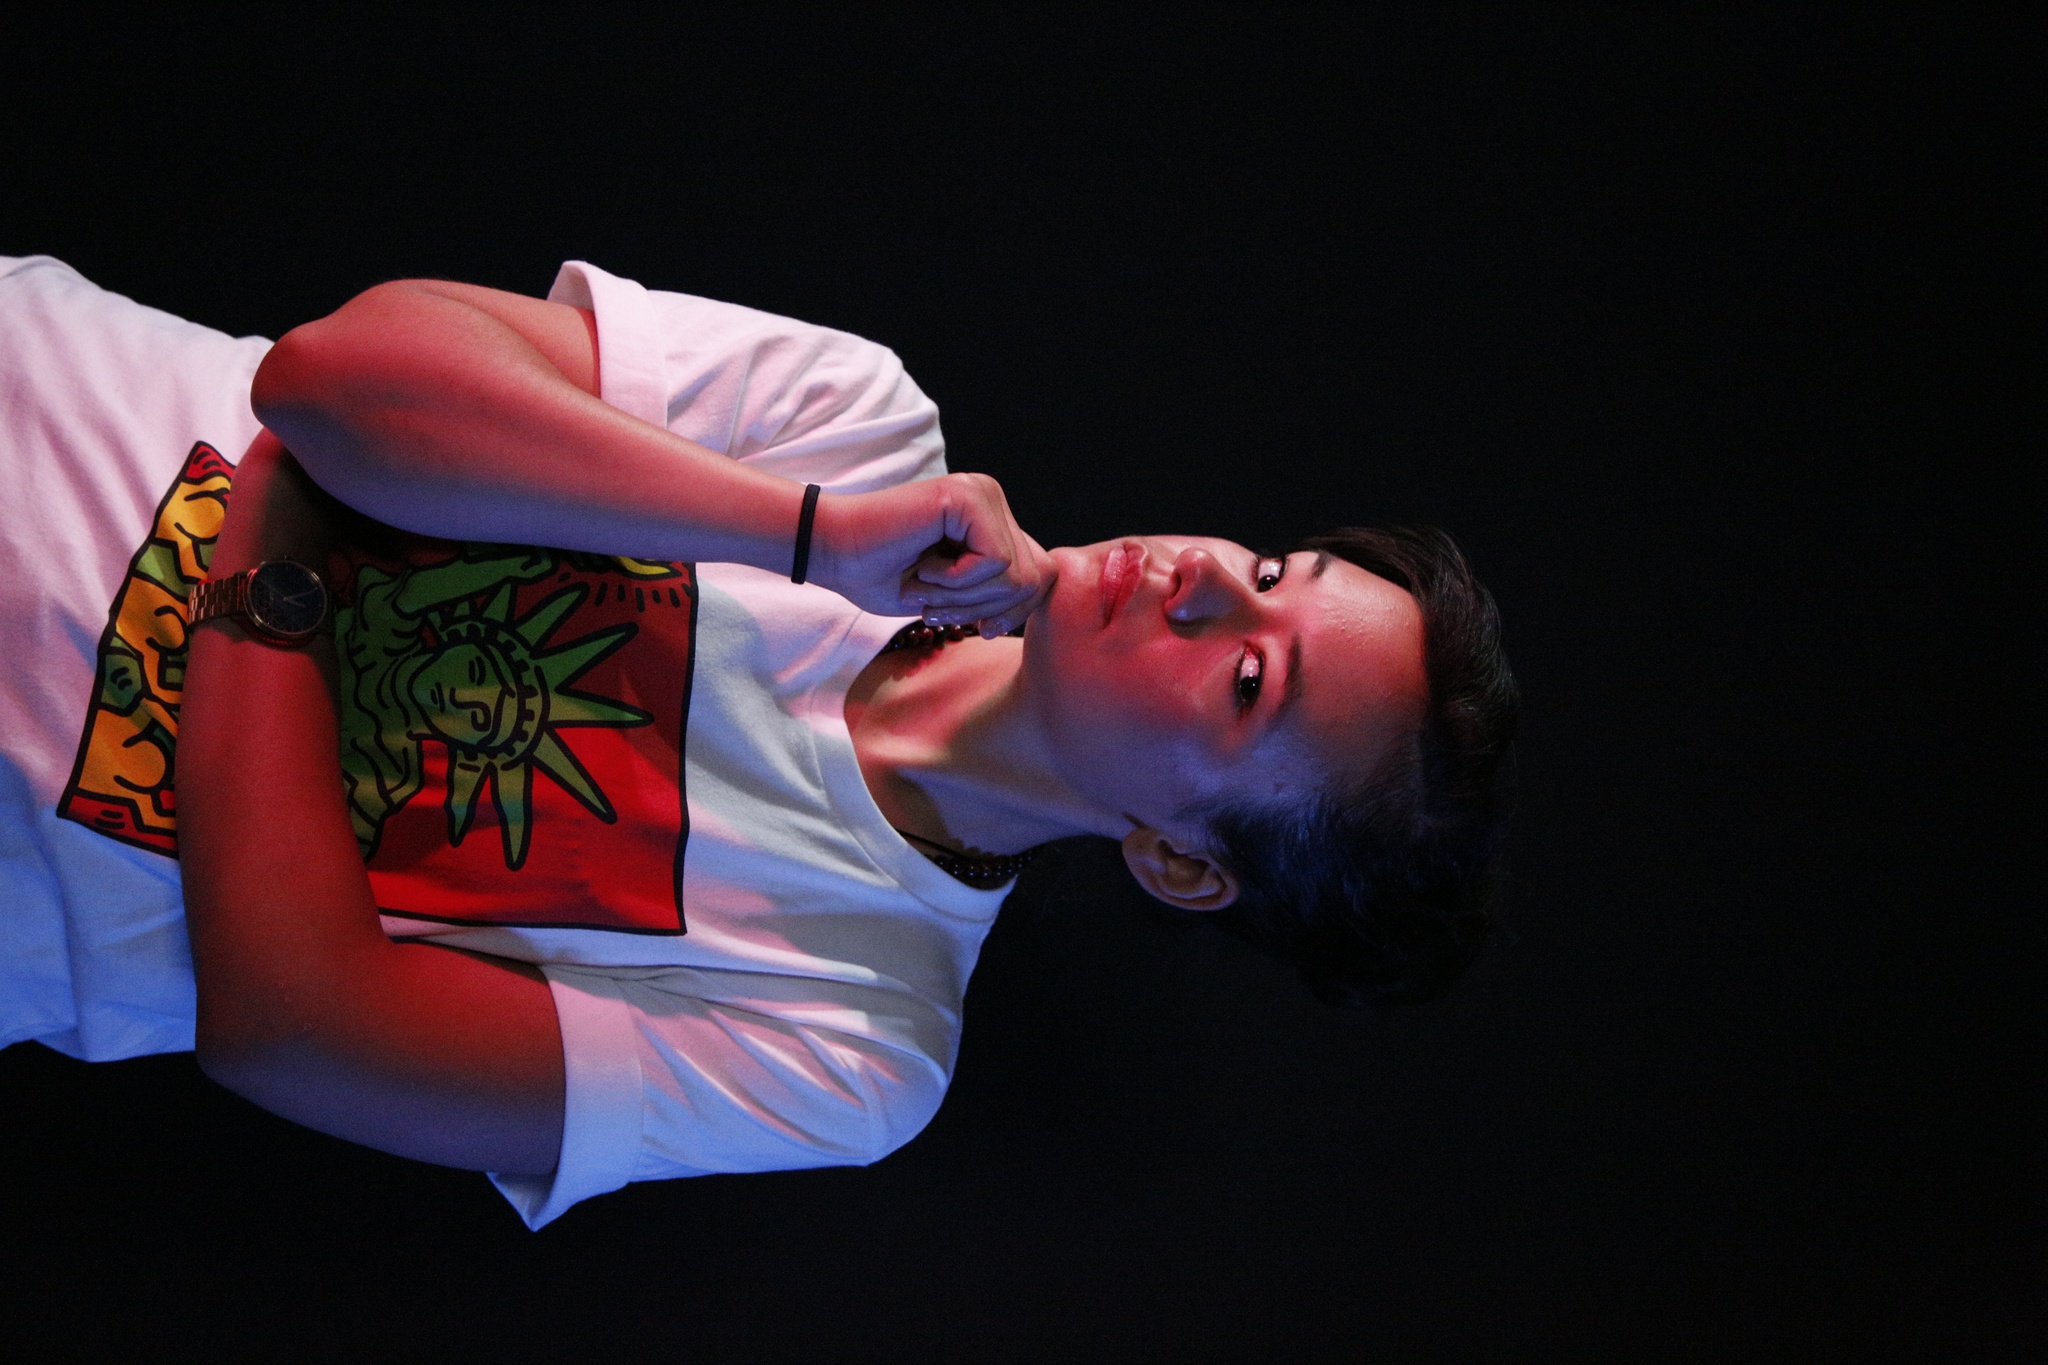 A portrait of Puerto Rican DJ Perly. She has short brown hair parted toward the right side of her head and looks at us sideways at an angle. She holds one hand up under her chin pensively, and wears a white t-shirt with an illustration of the Statue of Liberty.